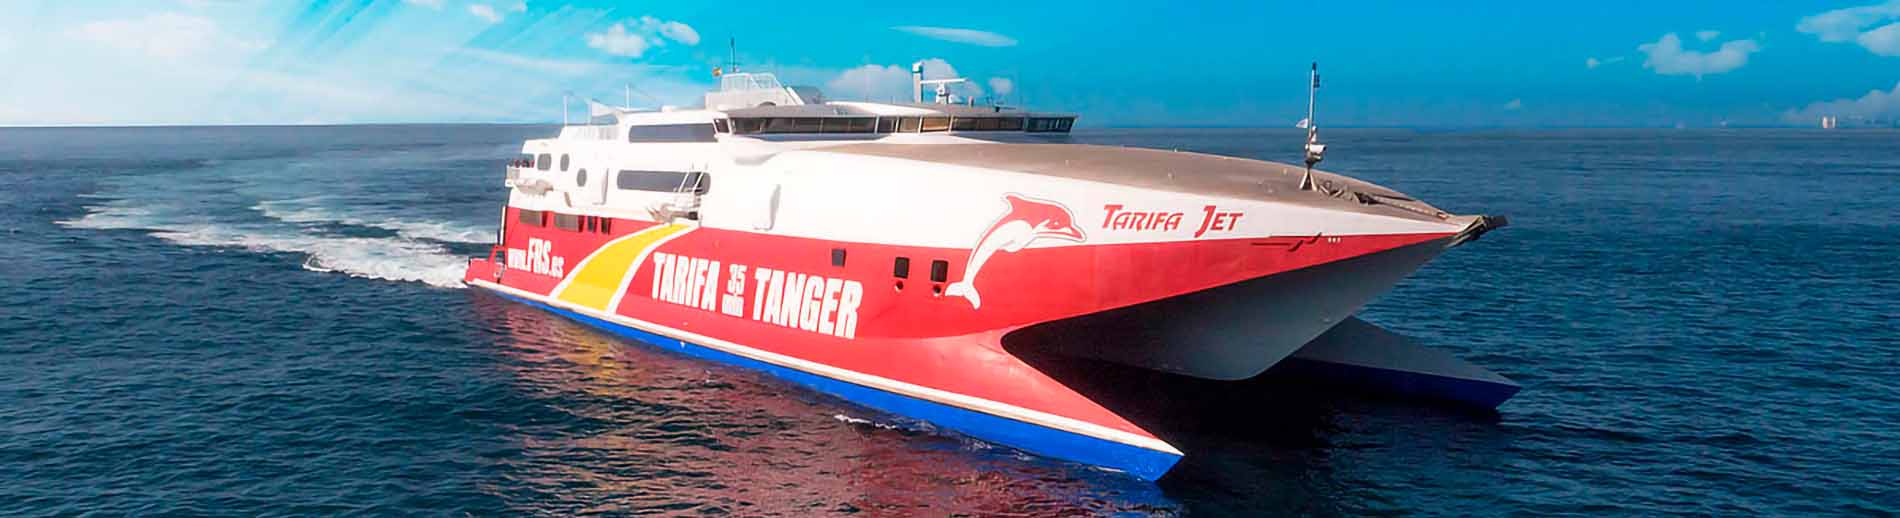 Resource image of the destination port Tangier Ville for the ferry route Tarifa - Tangier Ville